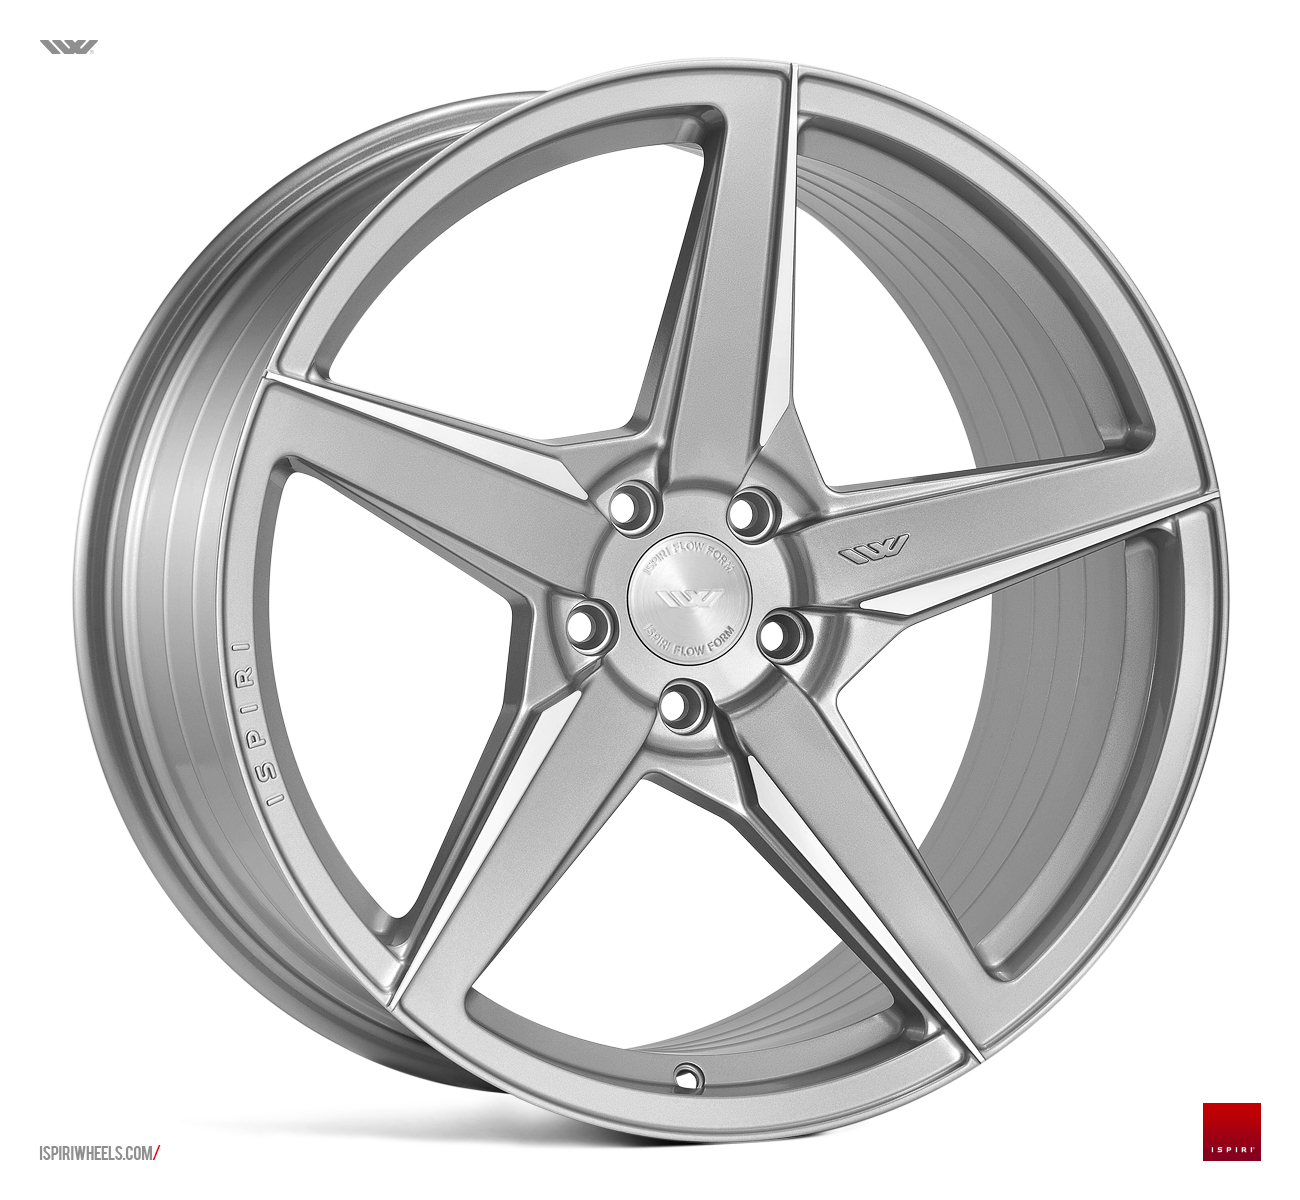 NEW 20" ISPIRI FFR5 5 SPOKE ALLOY WHEELS IN PURE SILVER BRUSHED, VARIOUS FITMENTS AVAILABLE